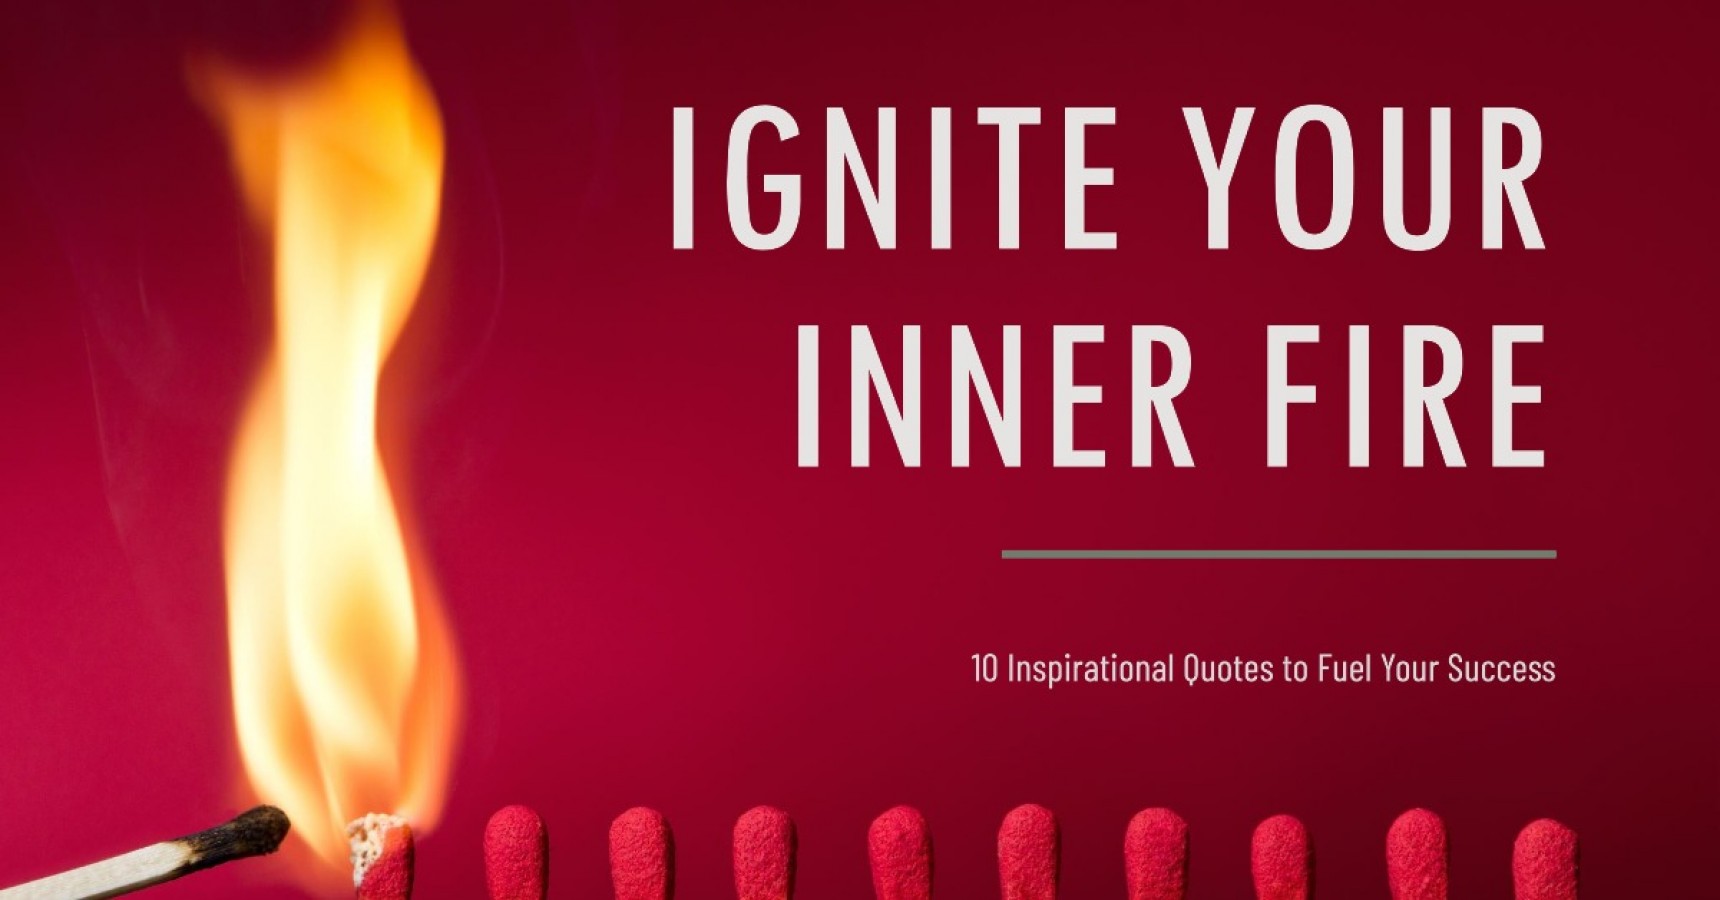 Basketball Quotes Motivational: Ignite Your Inner Fire